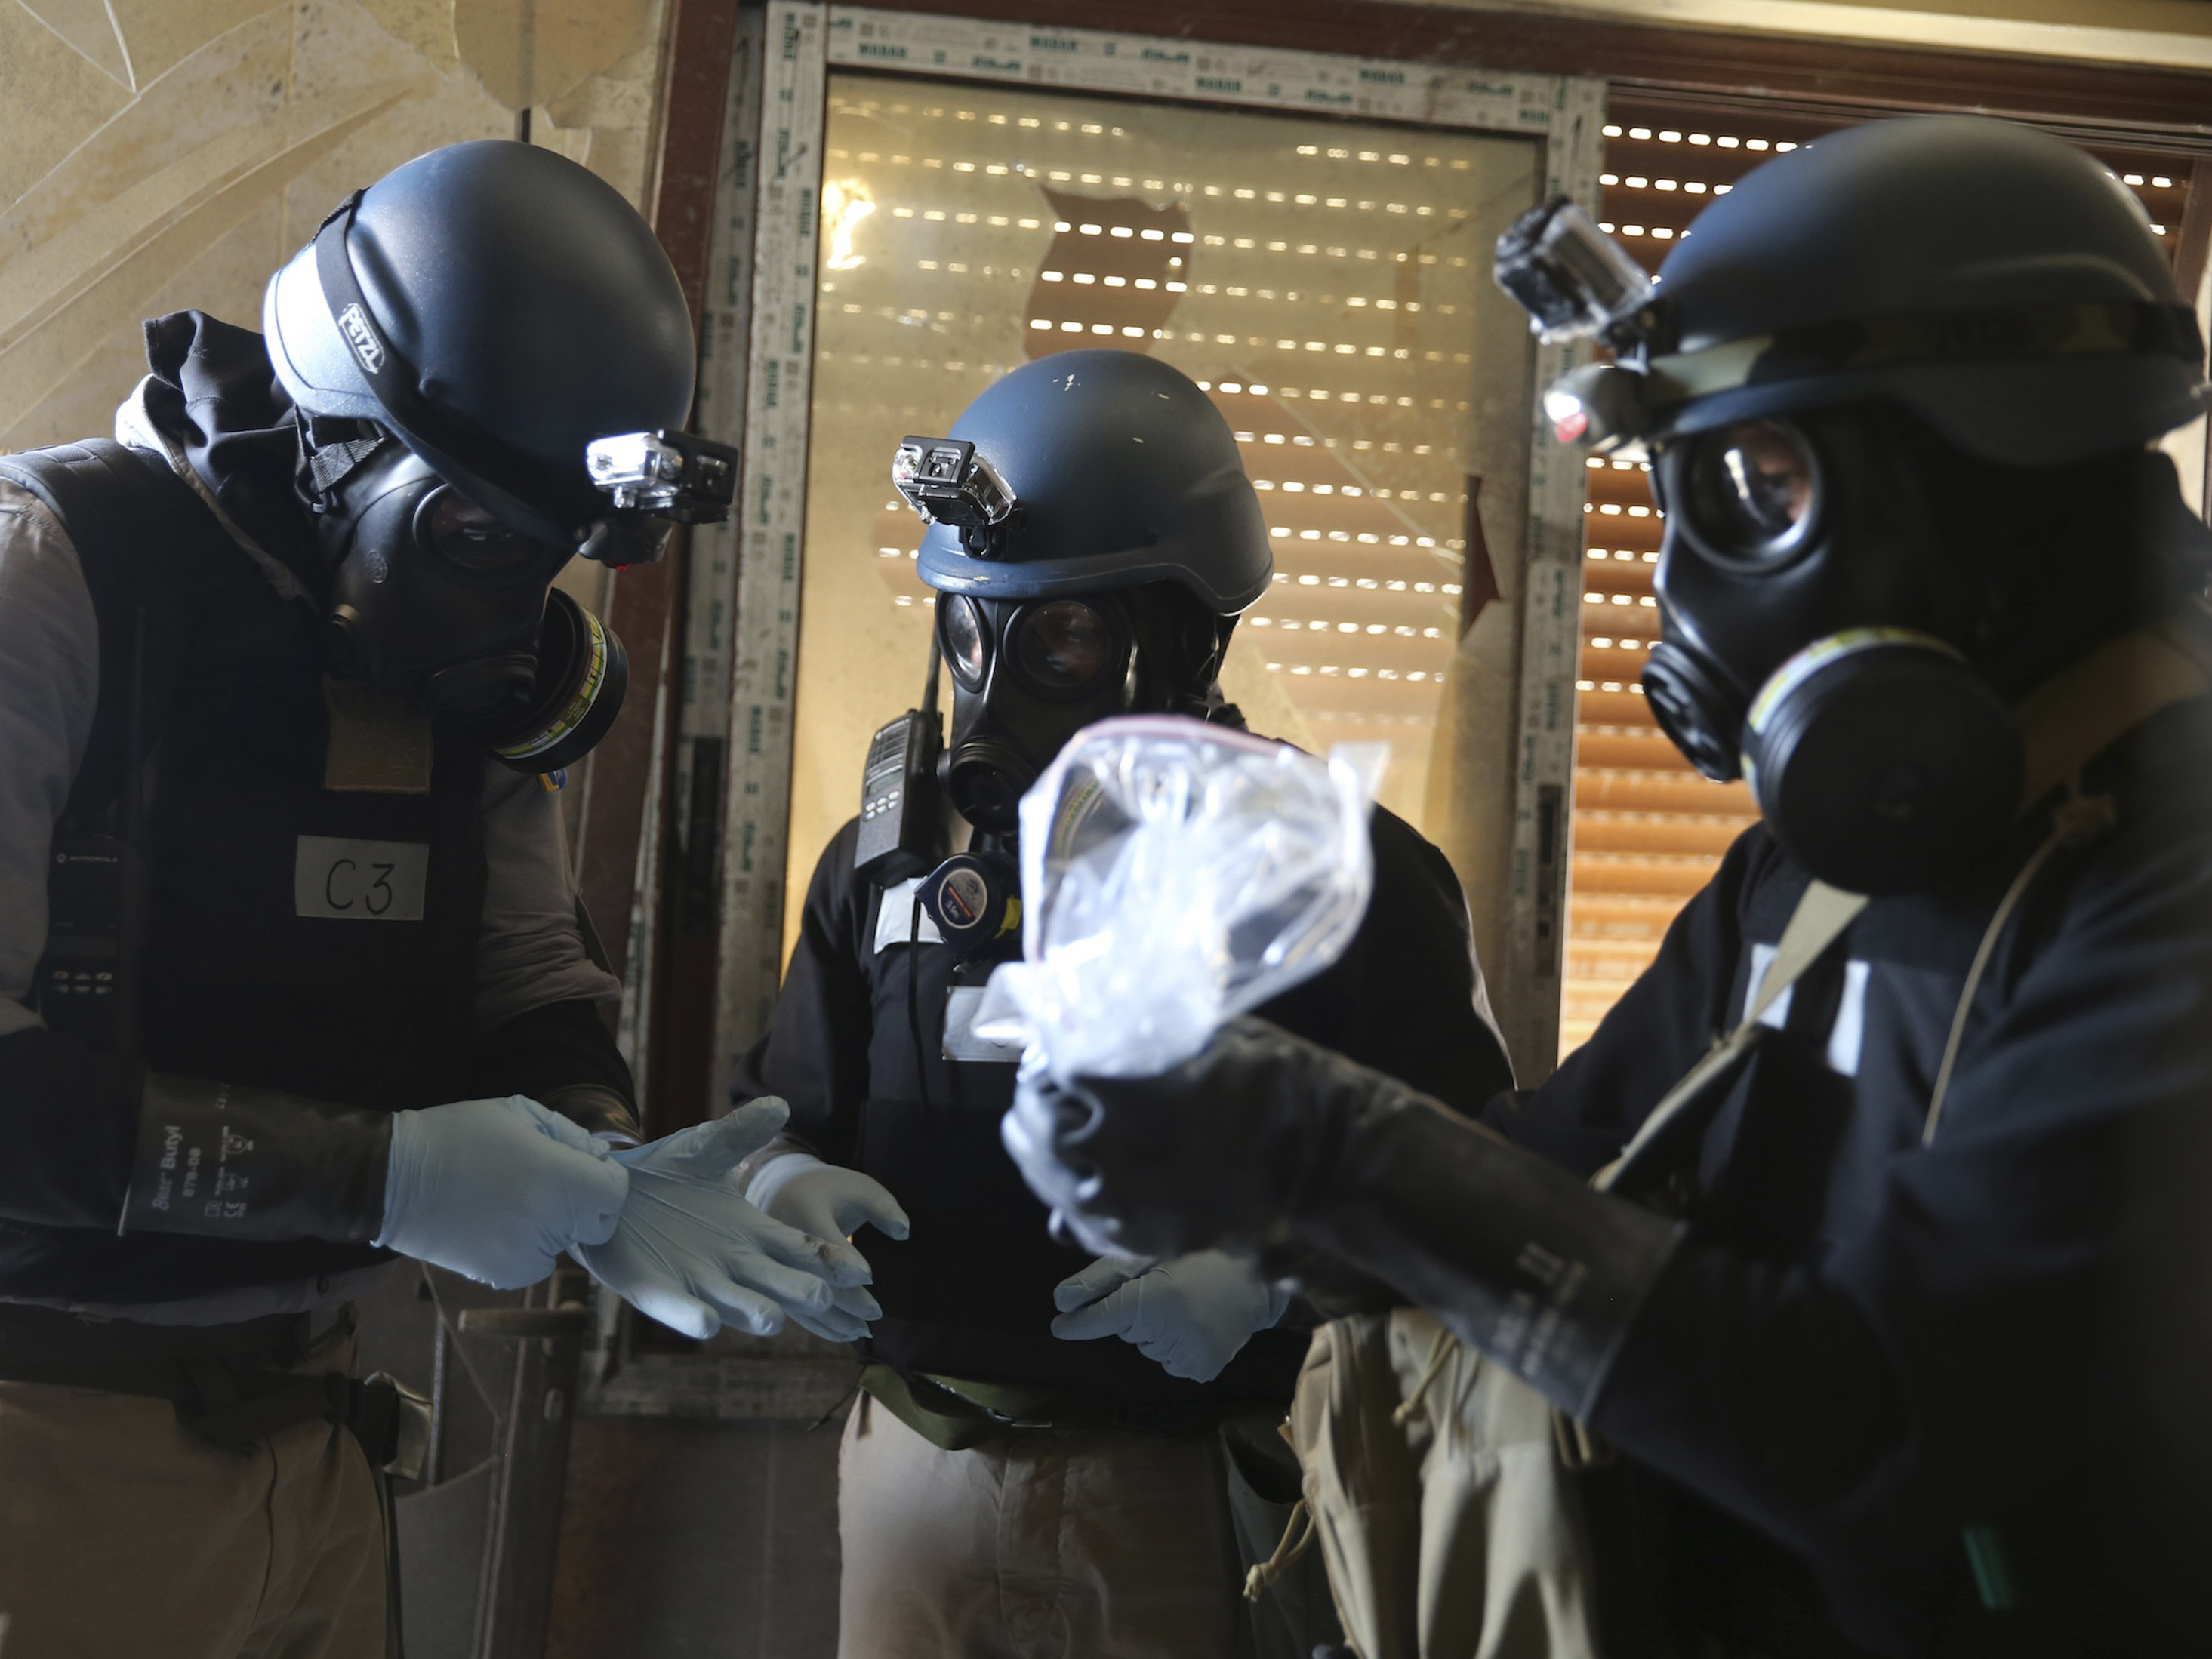 In 2013, chemical weapons inspectors working in the suburbs outside of Damascus were able to confirm the use of the nerve agent sarin.